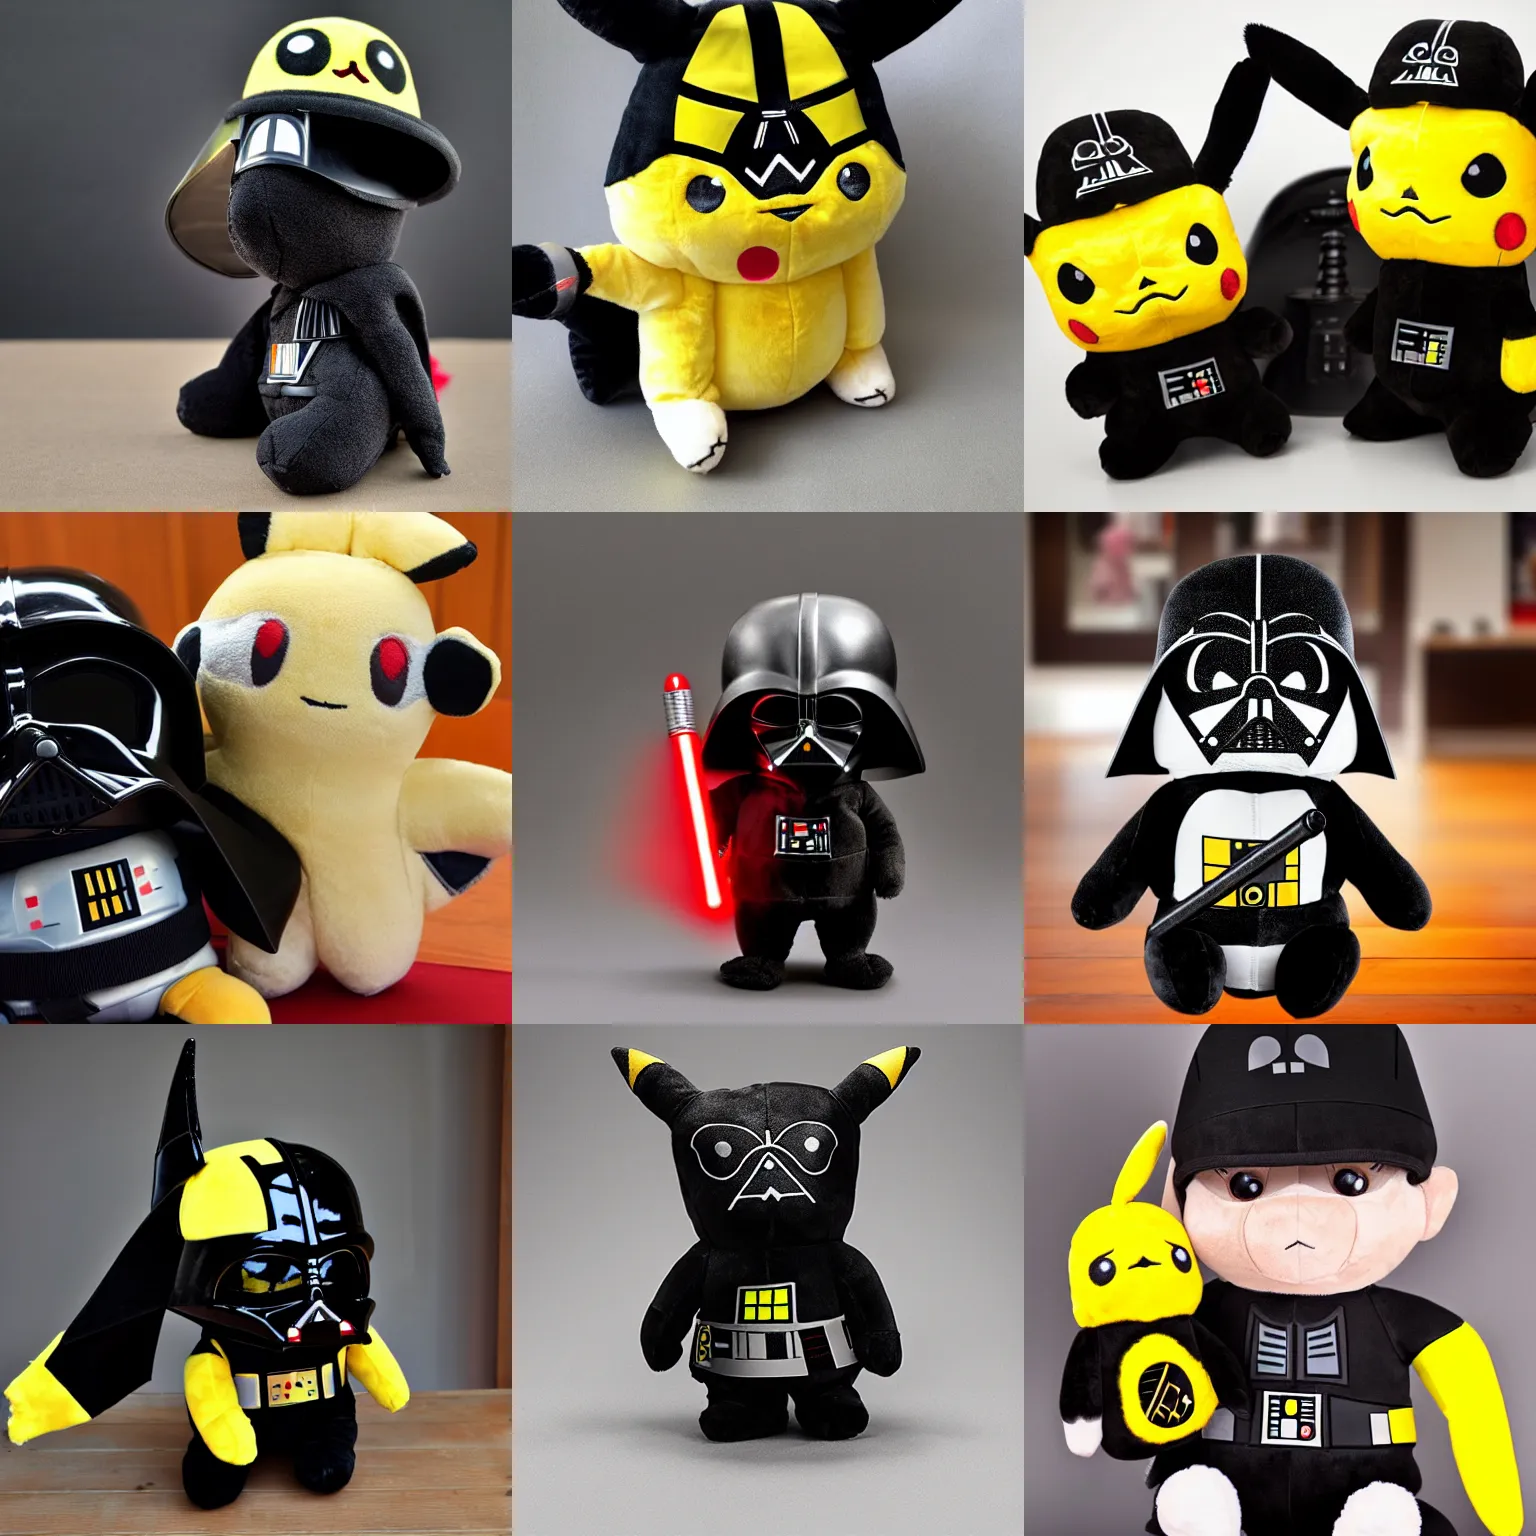 Prompt: Pikachu wearing a Darth Vader helmet and holding a lightsaber, detailed features, Plush toy, stuffed animal